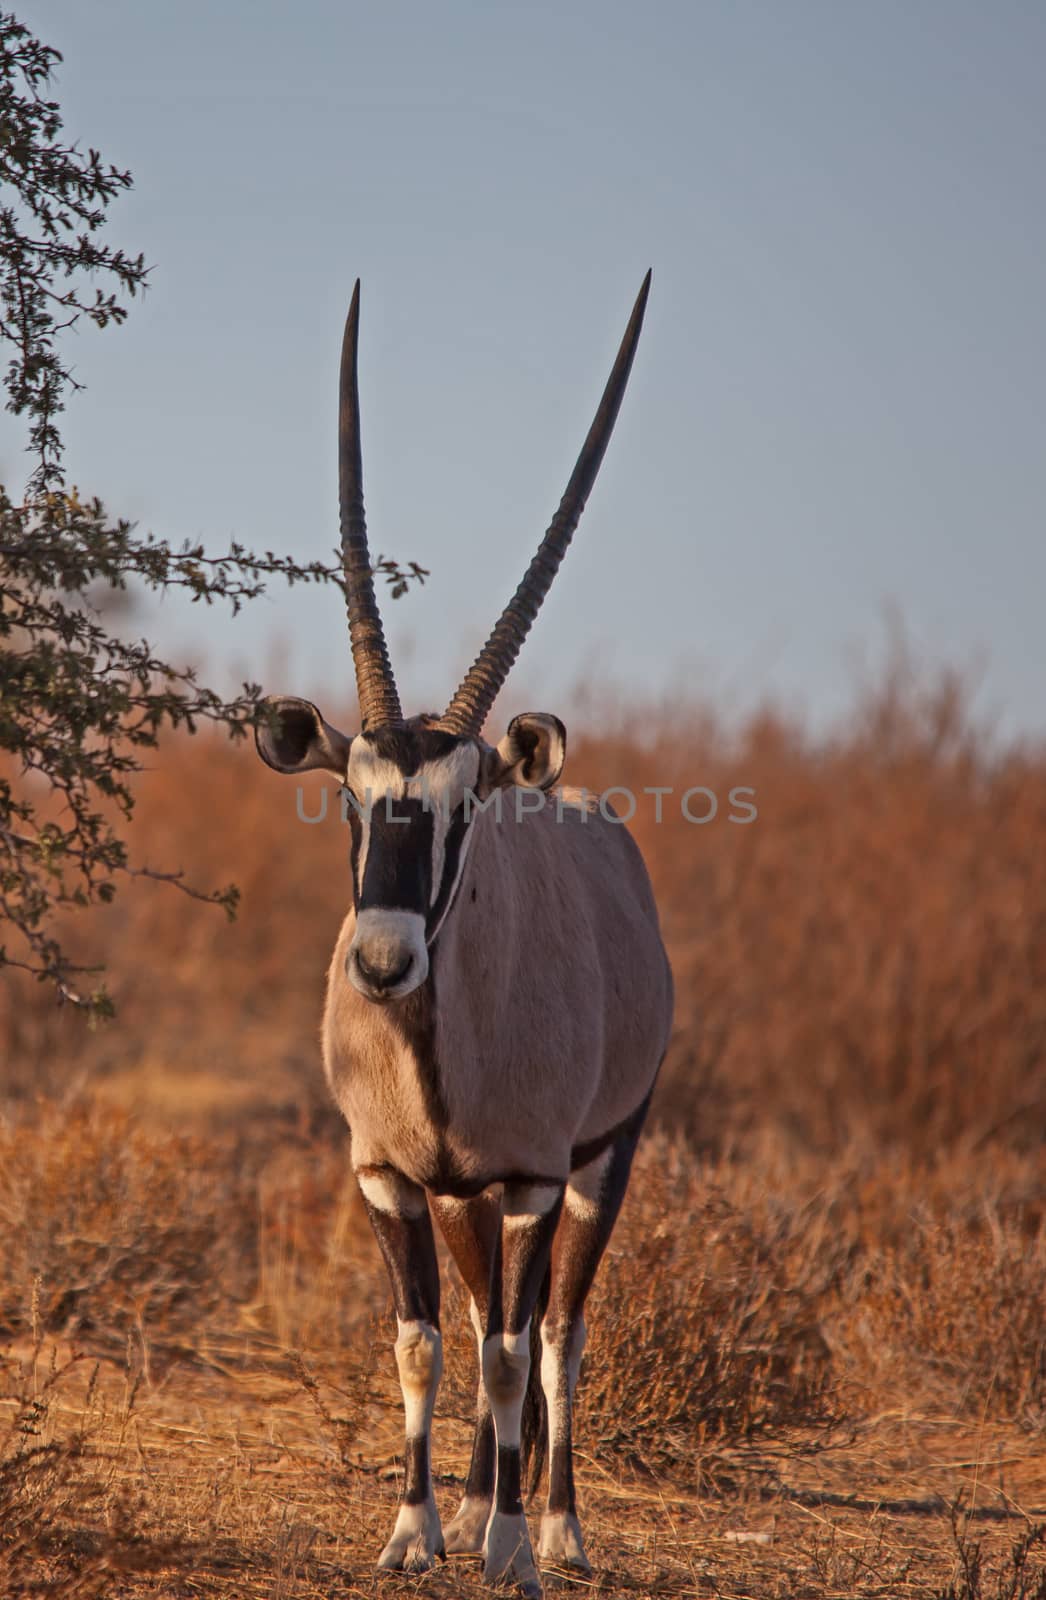 Single Oryx in Kgalagadi Trans Frontier Park 4644 by kobus_peche